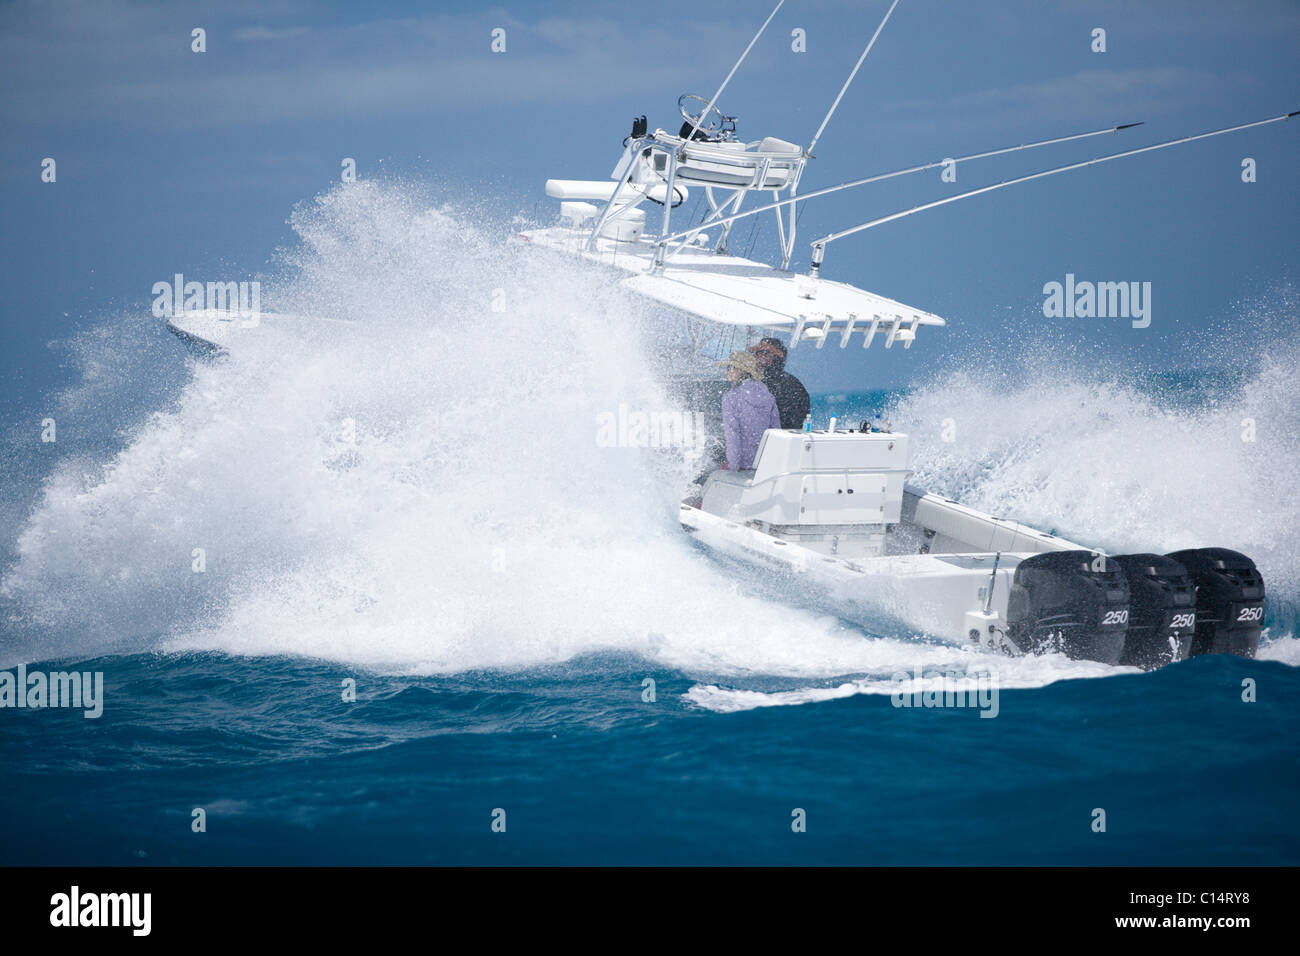 A fishing boat speeds through the blue surf spraying white water. Stock Photo